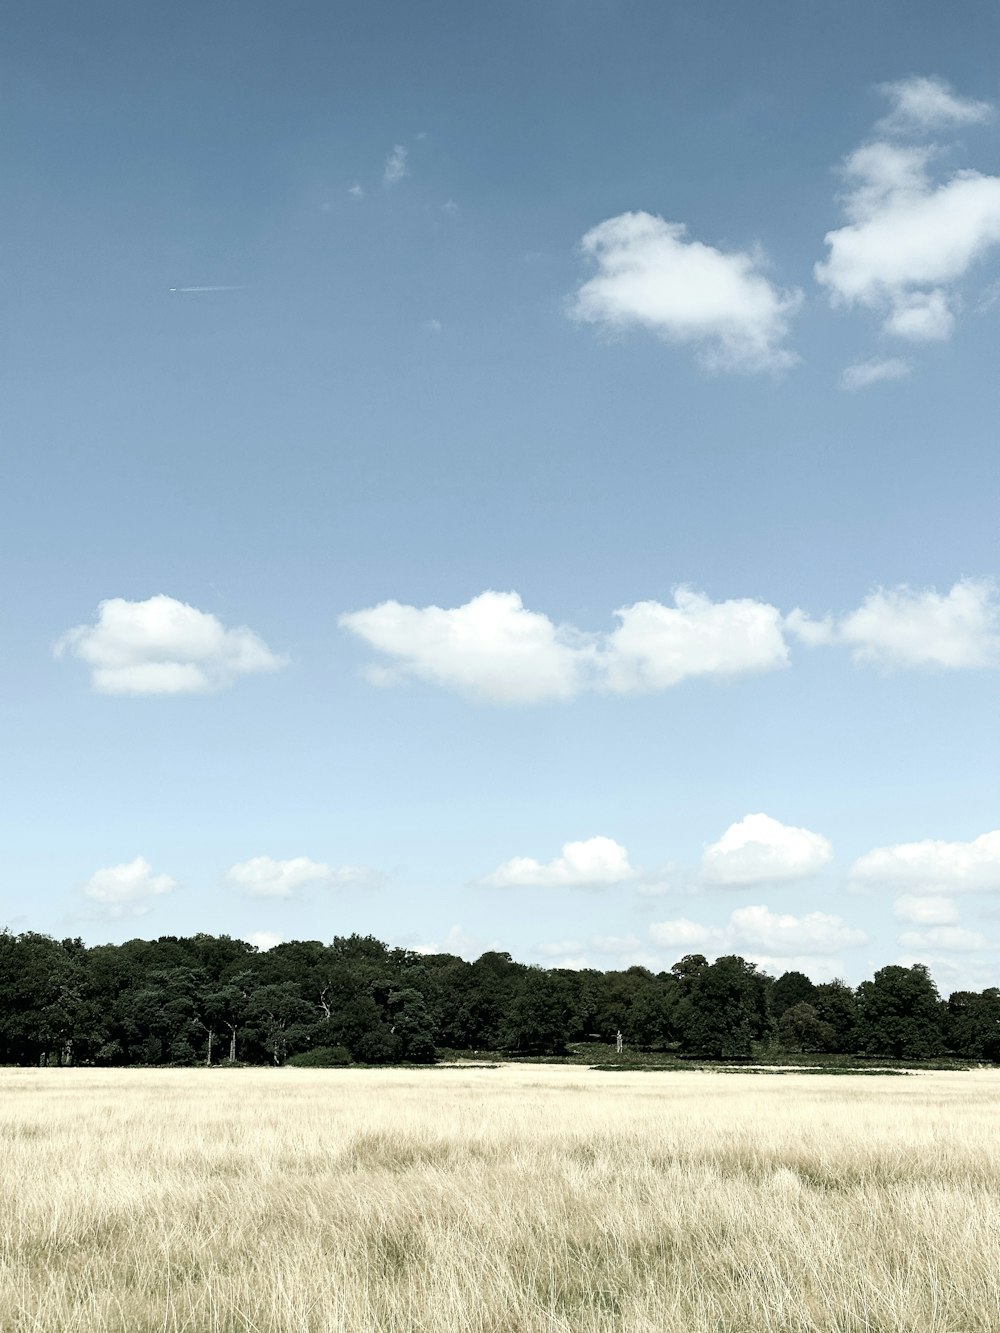 a large field of grass with trees in the background